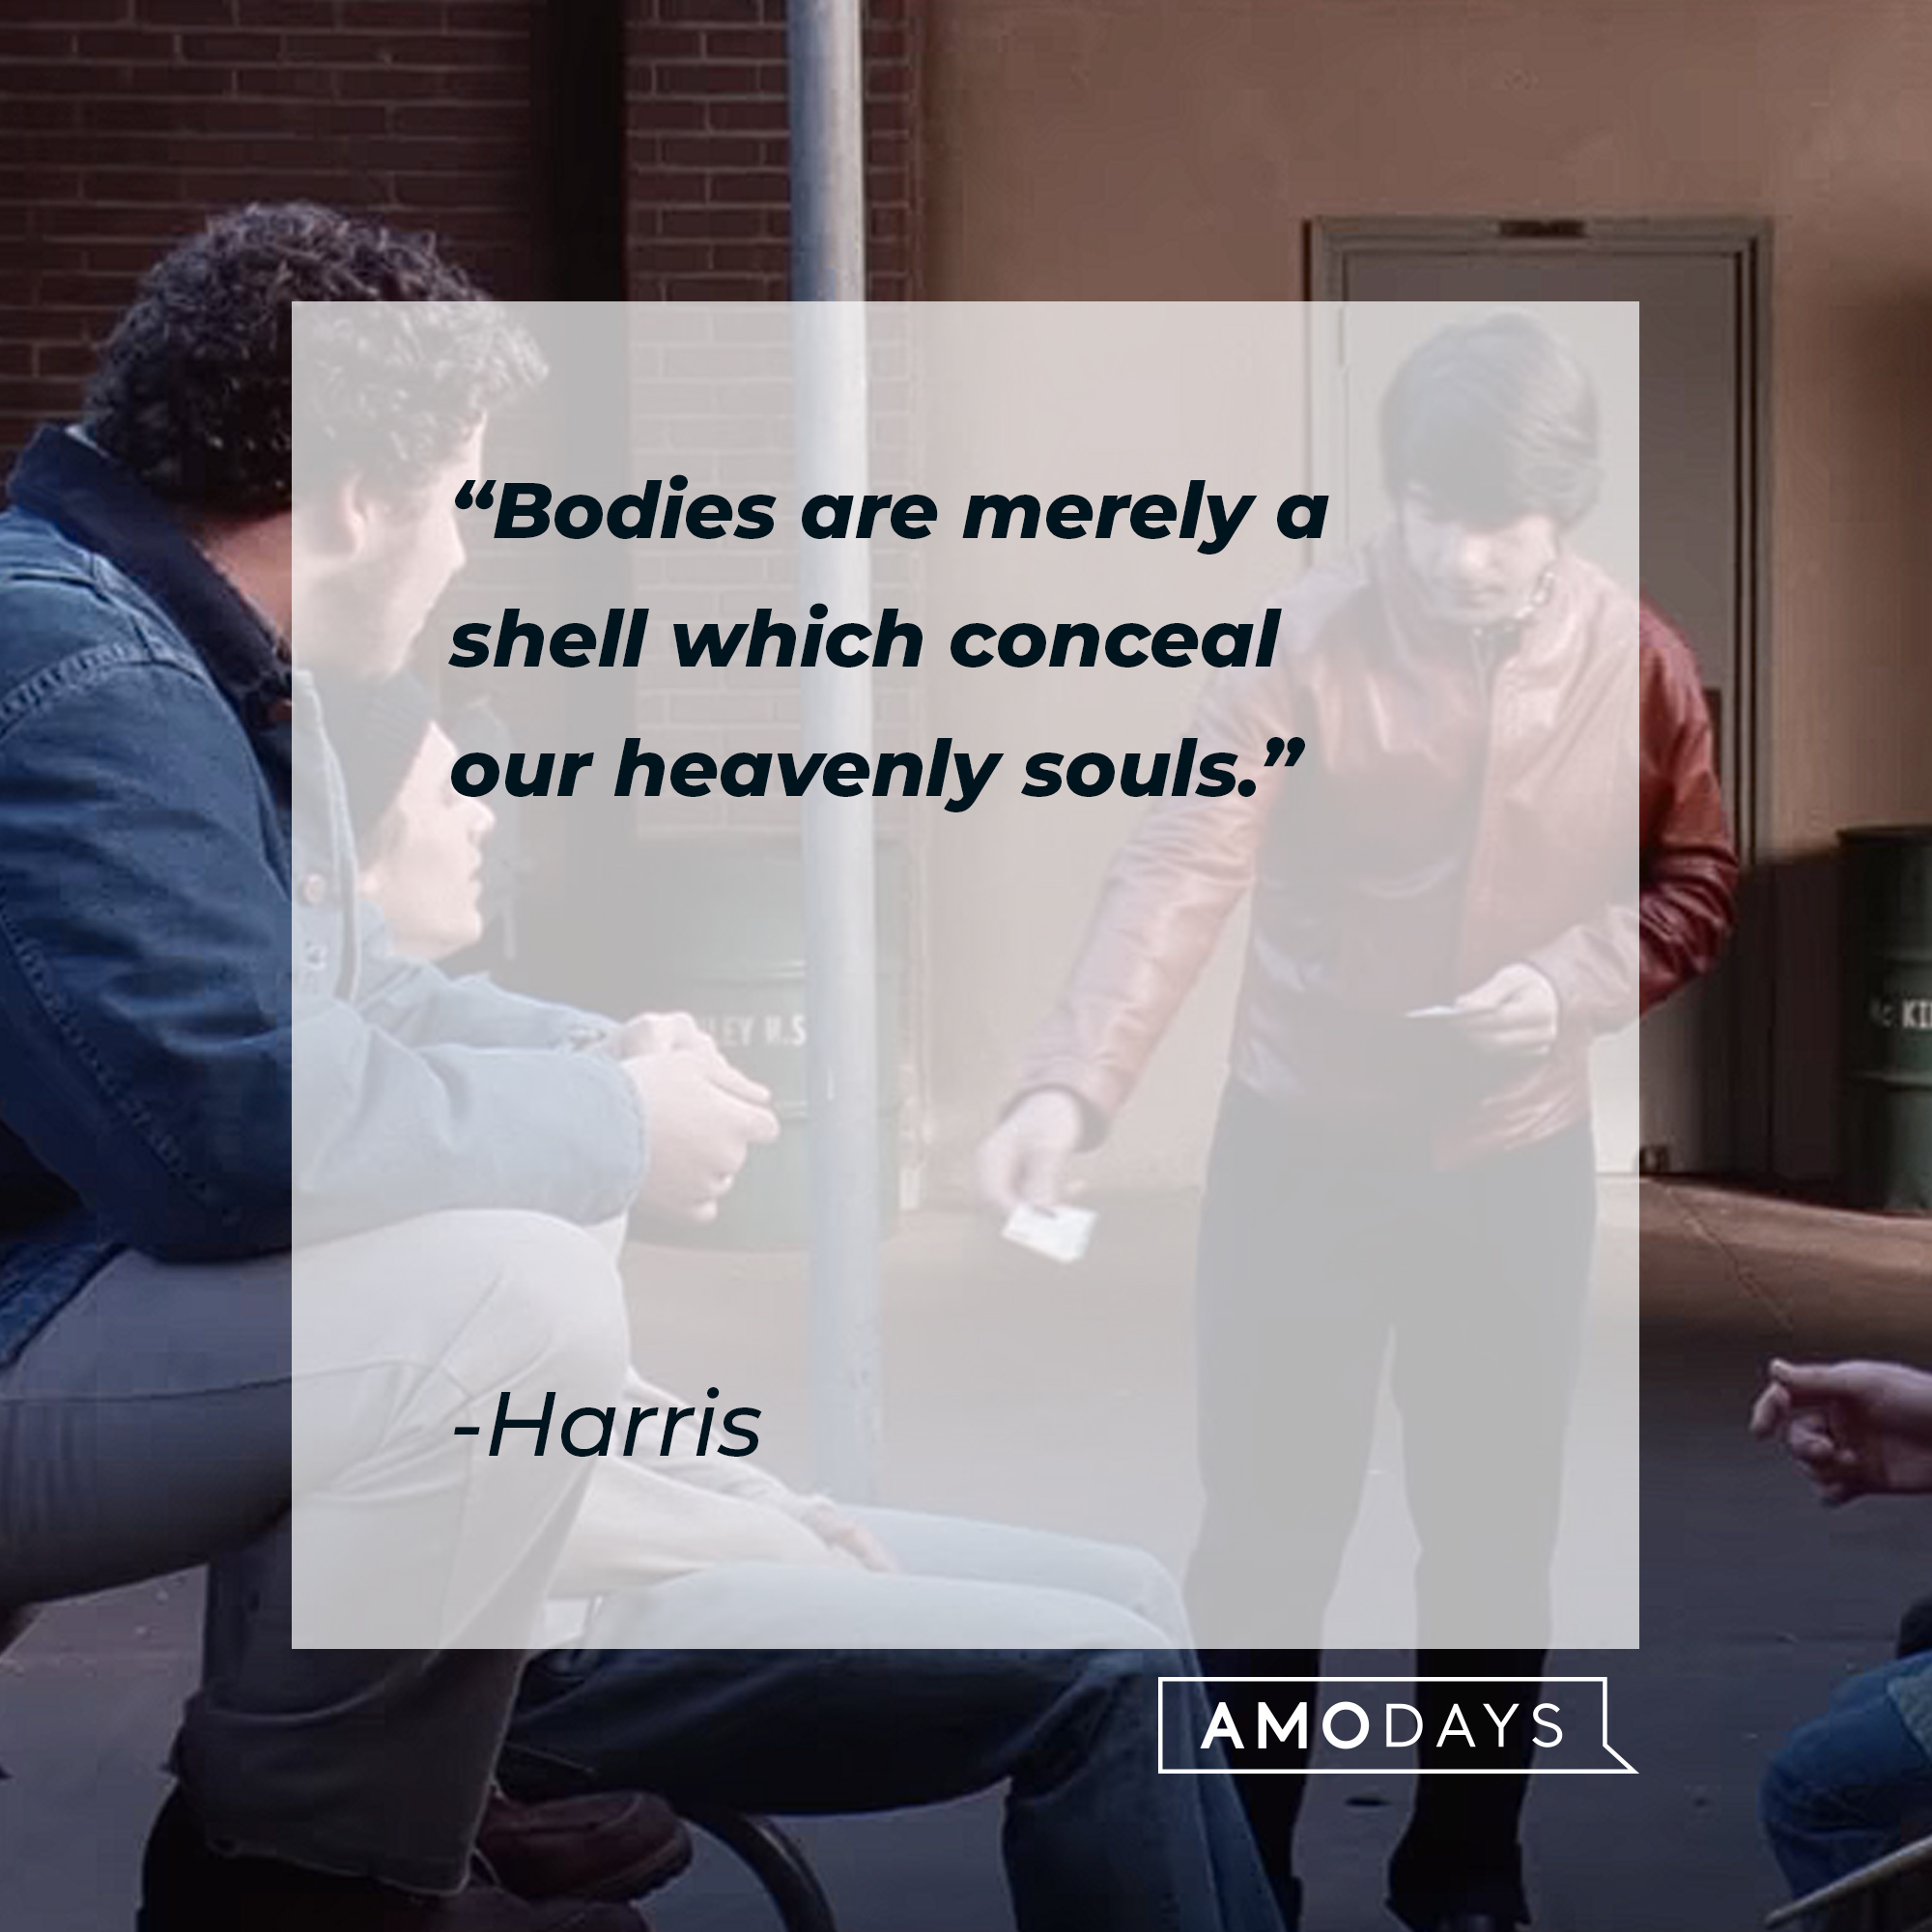 Harris' quote: "Bodies are merely a shell which conceal our heavenly souls." | Source: Youtube.com/paramountmovies